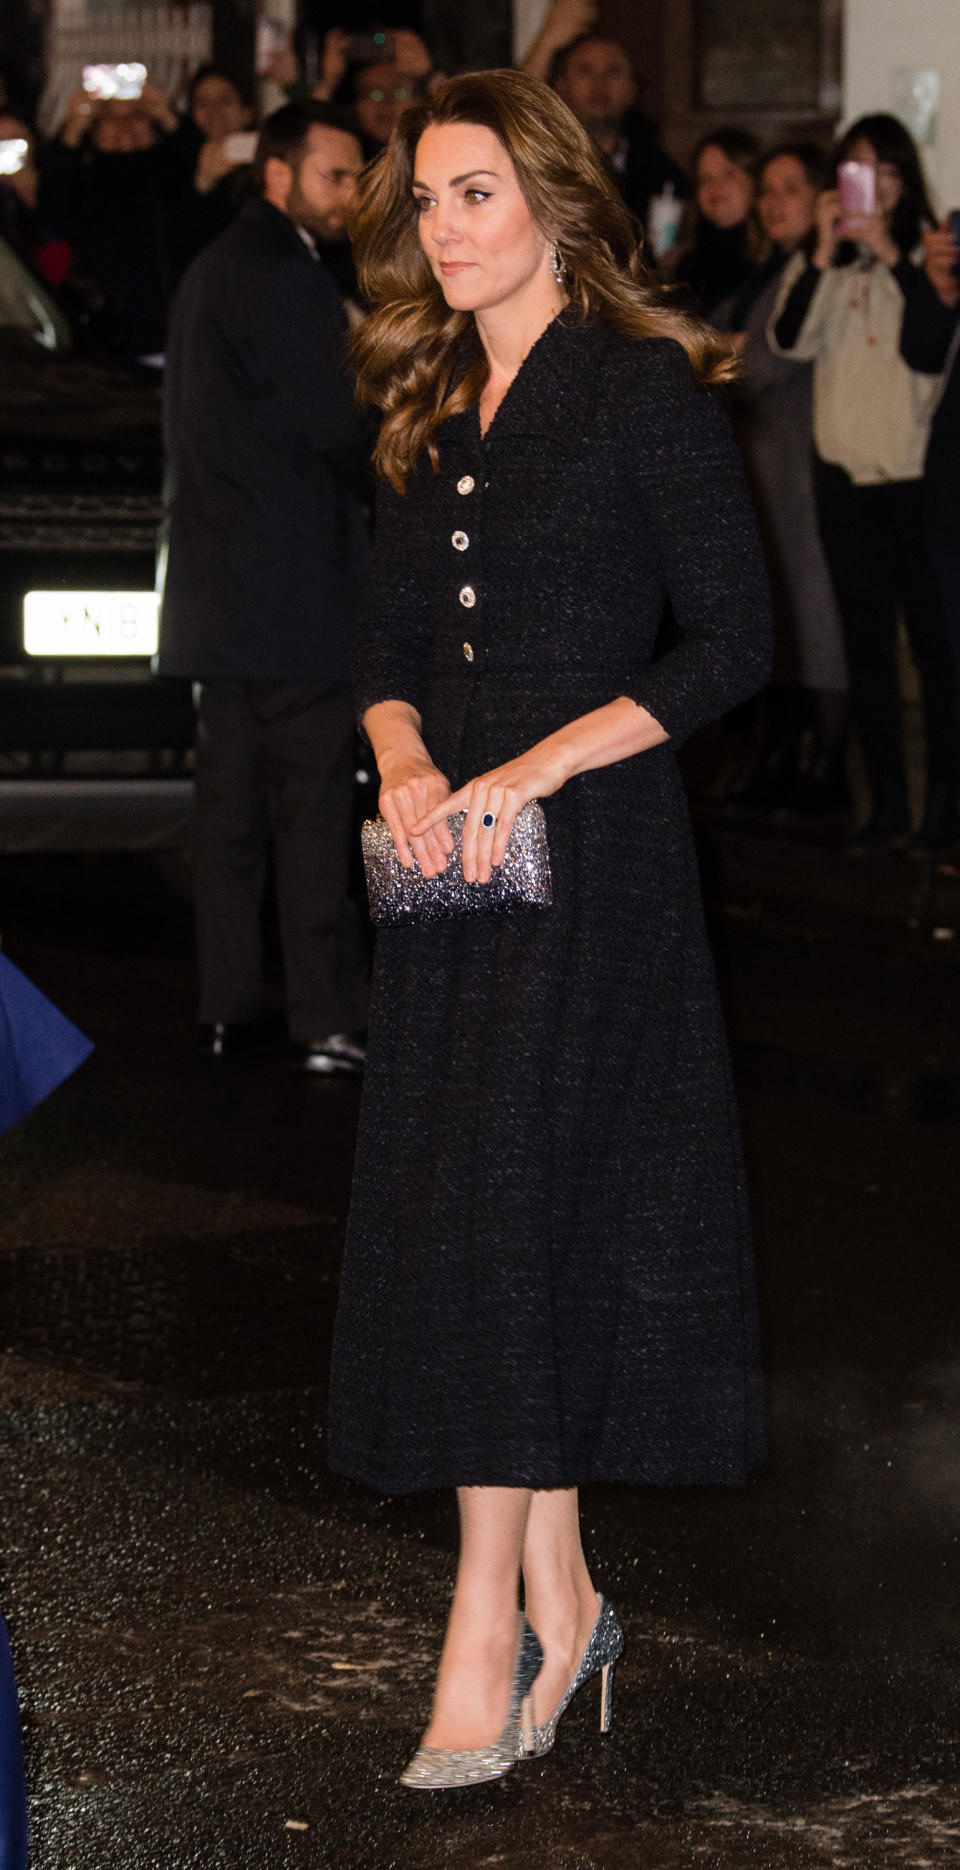 LONDON, ENGLAND - FEBRUARY 25:  Catherine, Duchess of Cambridge attends a charity performance of "Dear Evan Hansen" in aid of The Royal Foundation at Noel Coward Theatre on February 25, 2020 in London, England. (Photo by Samir Hussein/WireImage)